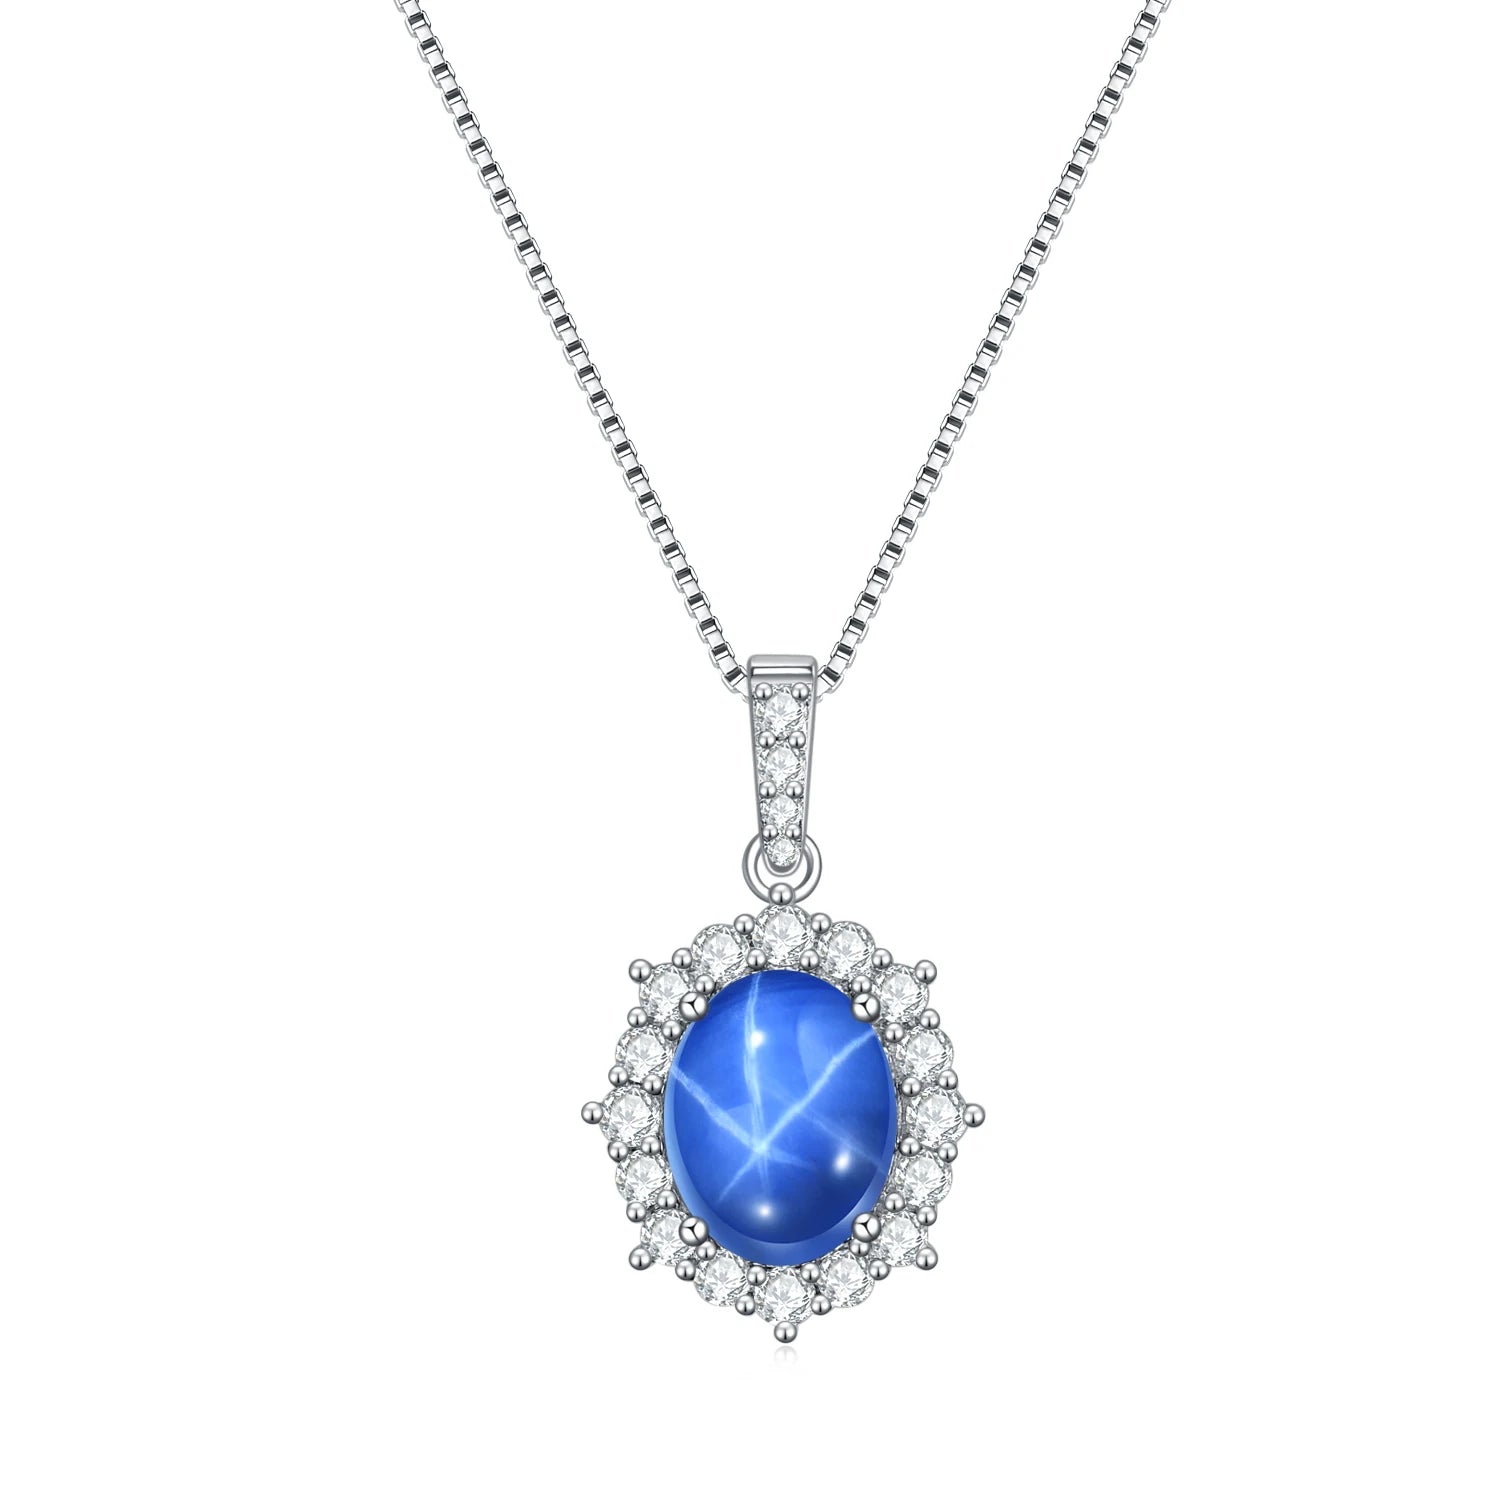 GEM'S BALLET Dainty Blue Lindy Star Sapphire Statement Pendant Necklace in 925 Sterling Silver Gift For Her Mothers Day Gifts Lab Star Sapphire 925 Sterling Silver 45cm | CHINA